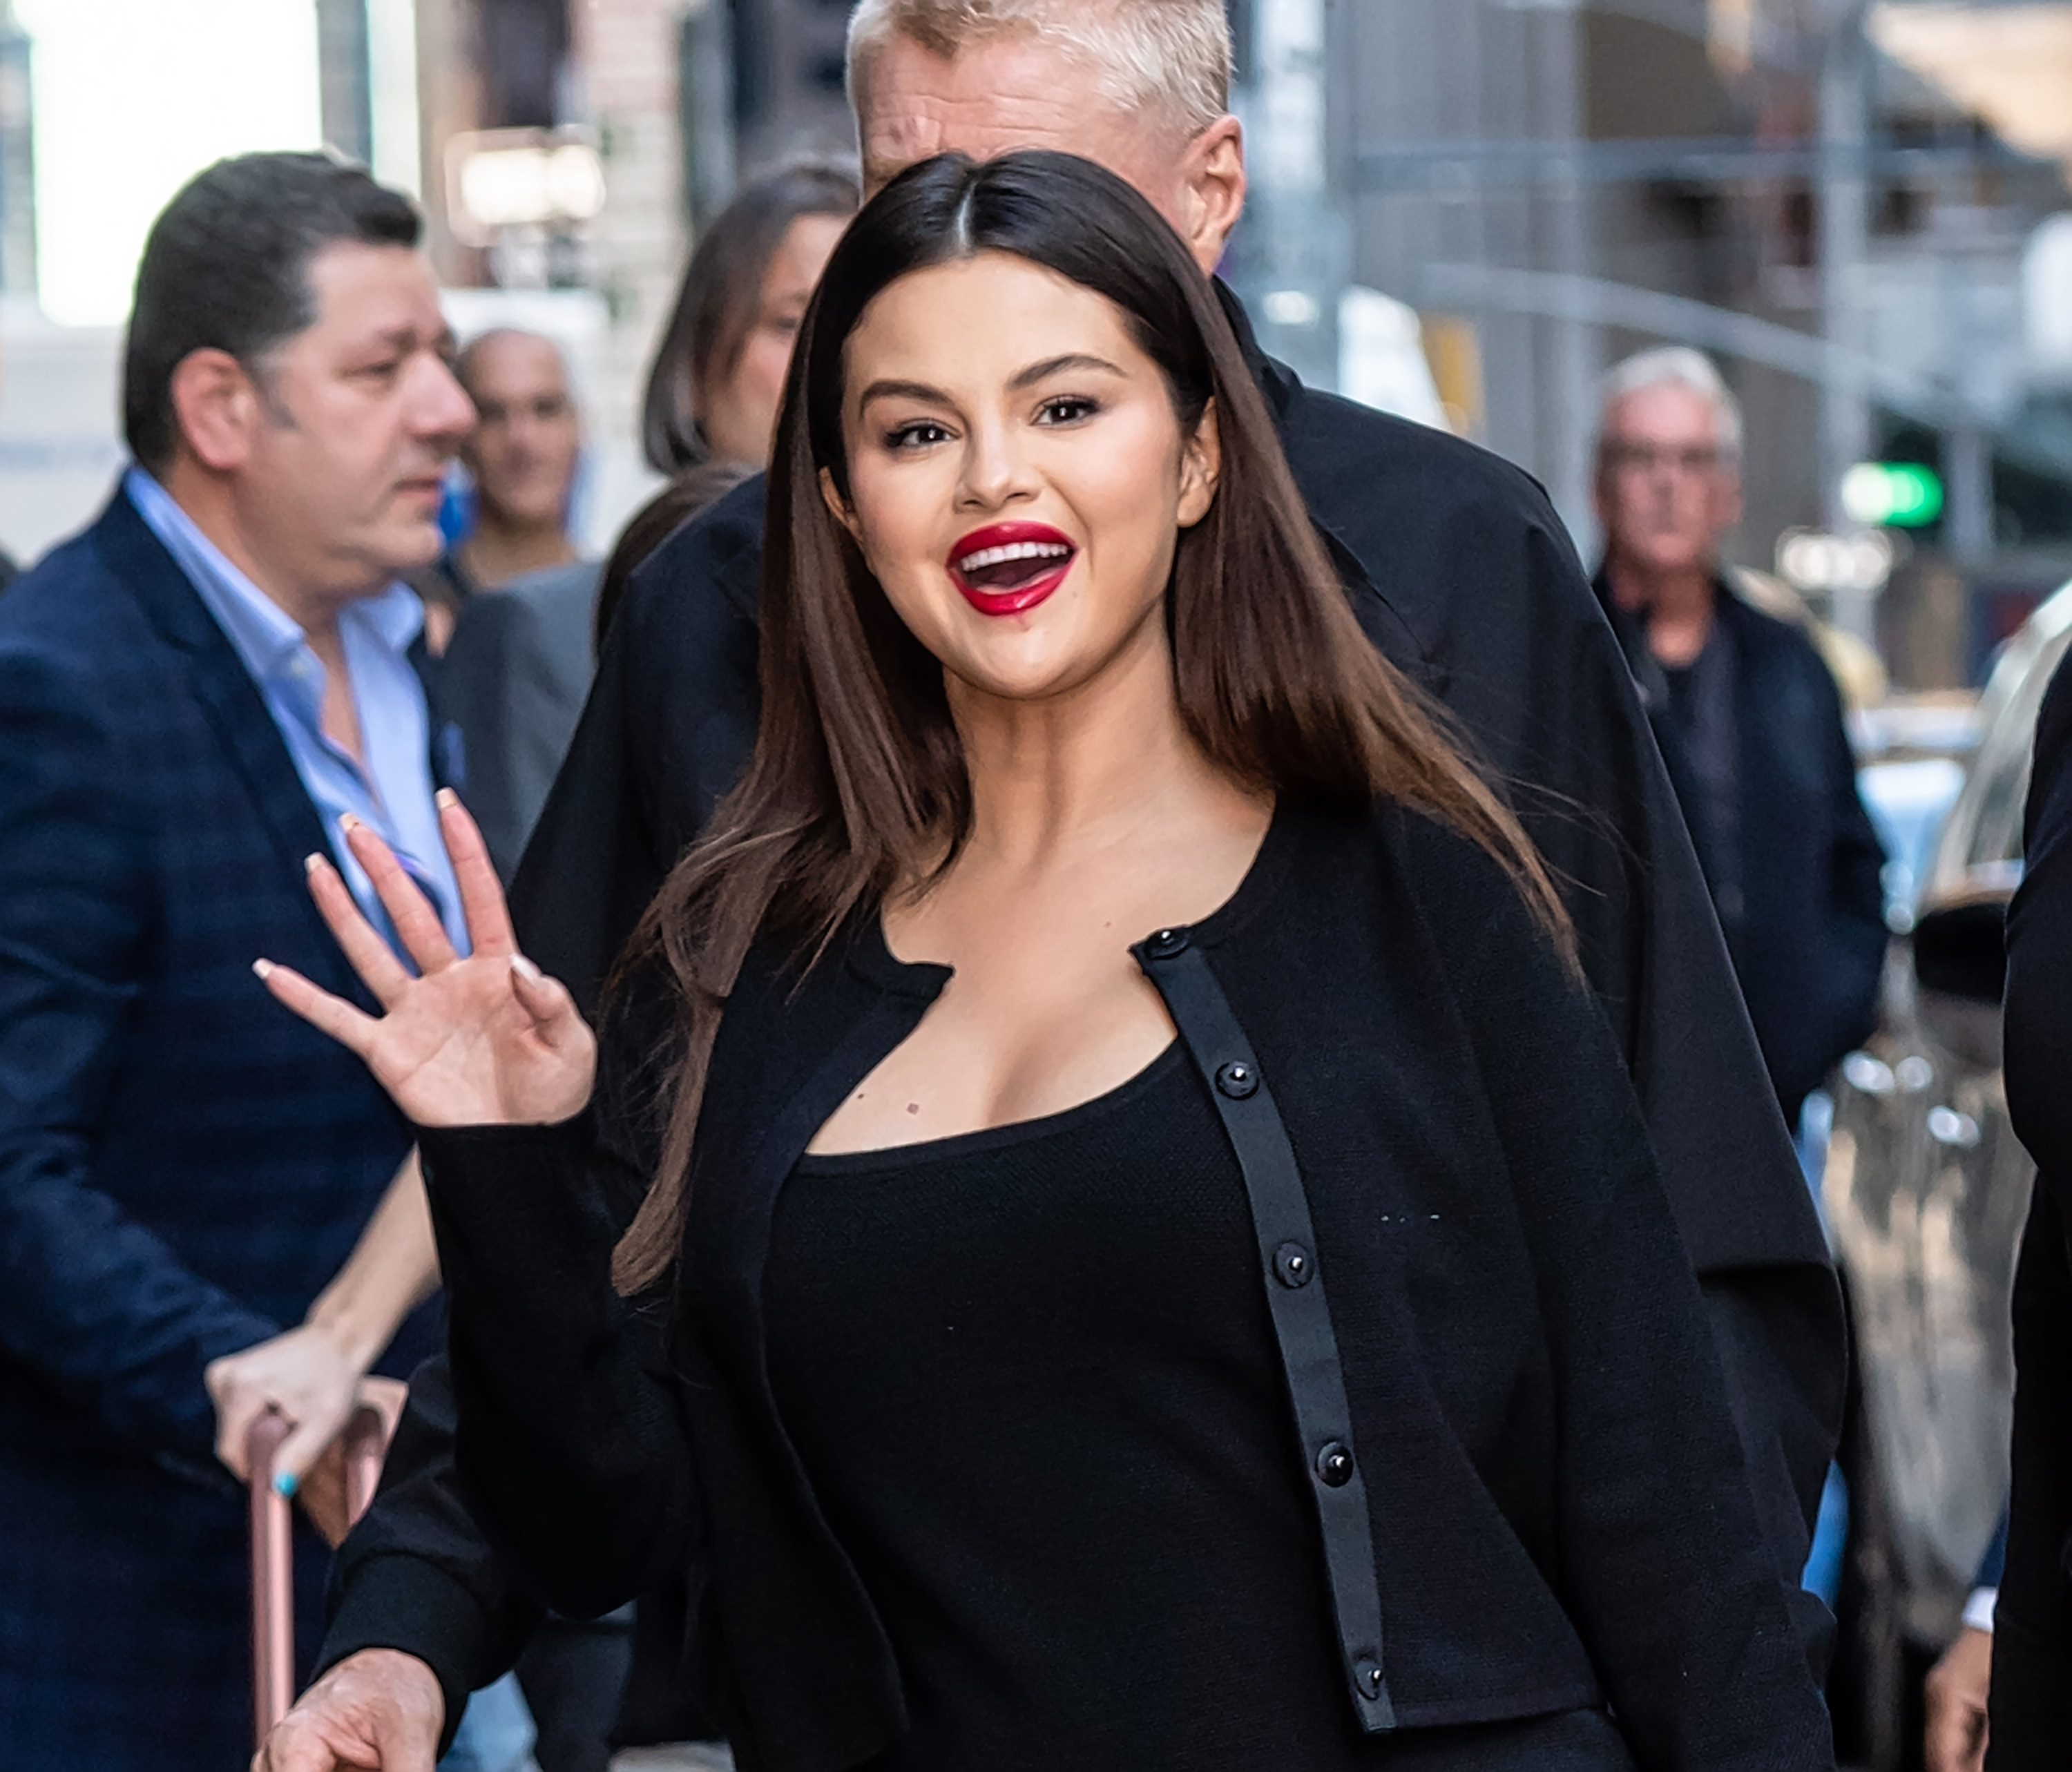 Selena waves her hand at a crowd while smiling